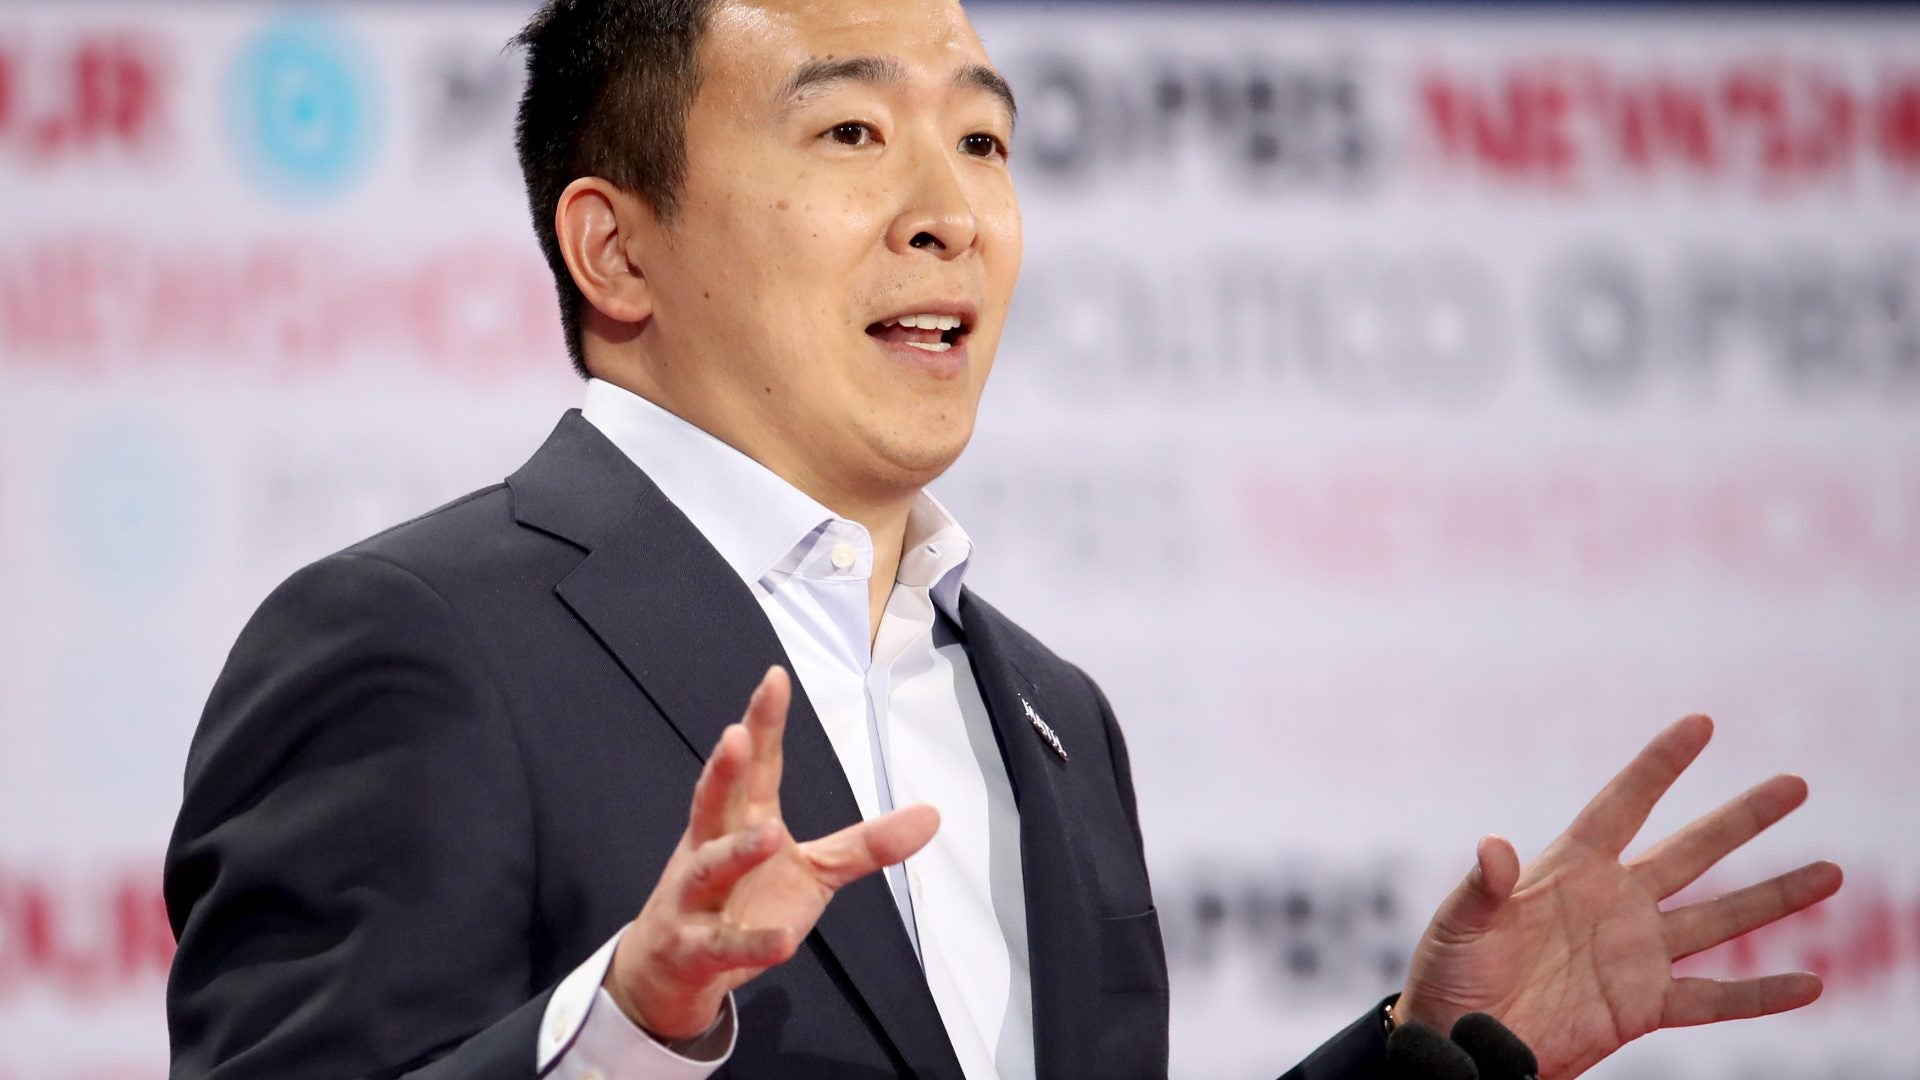 Yang: It's 'An Honor And Disappointment' To Be The Only Candidate Of Color At 6th Debate